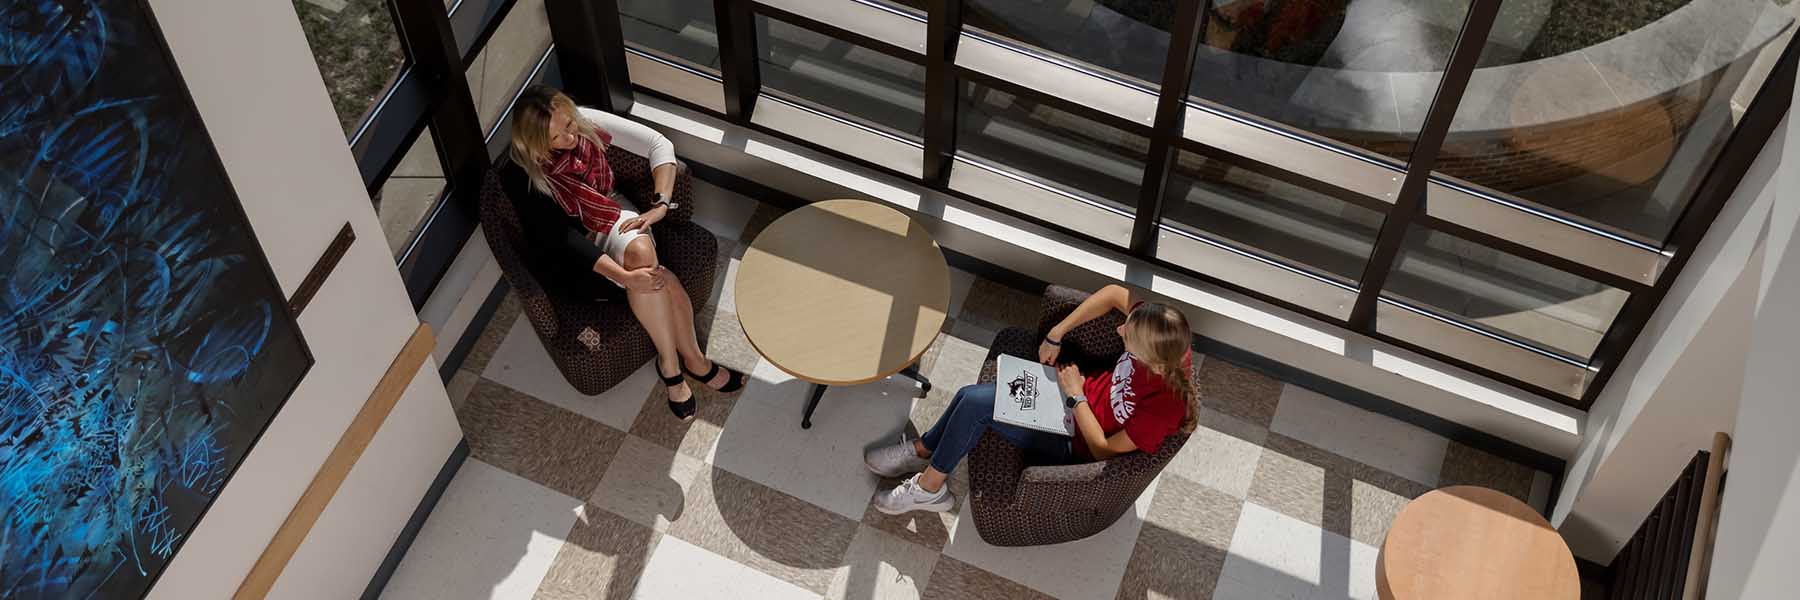 A faculty member meeting with a student next to large windows